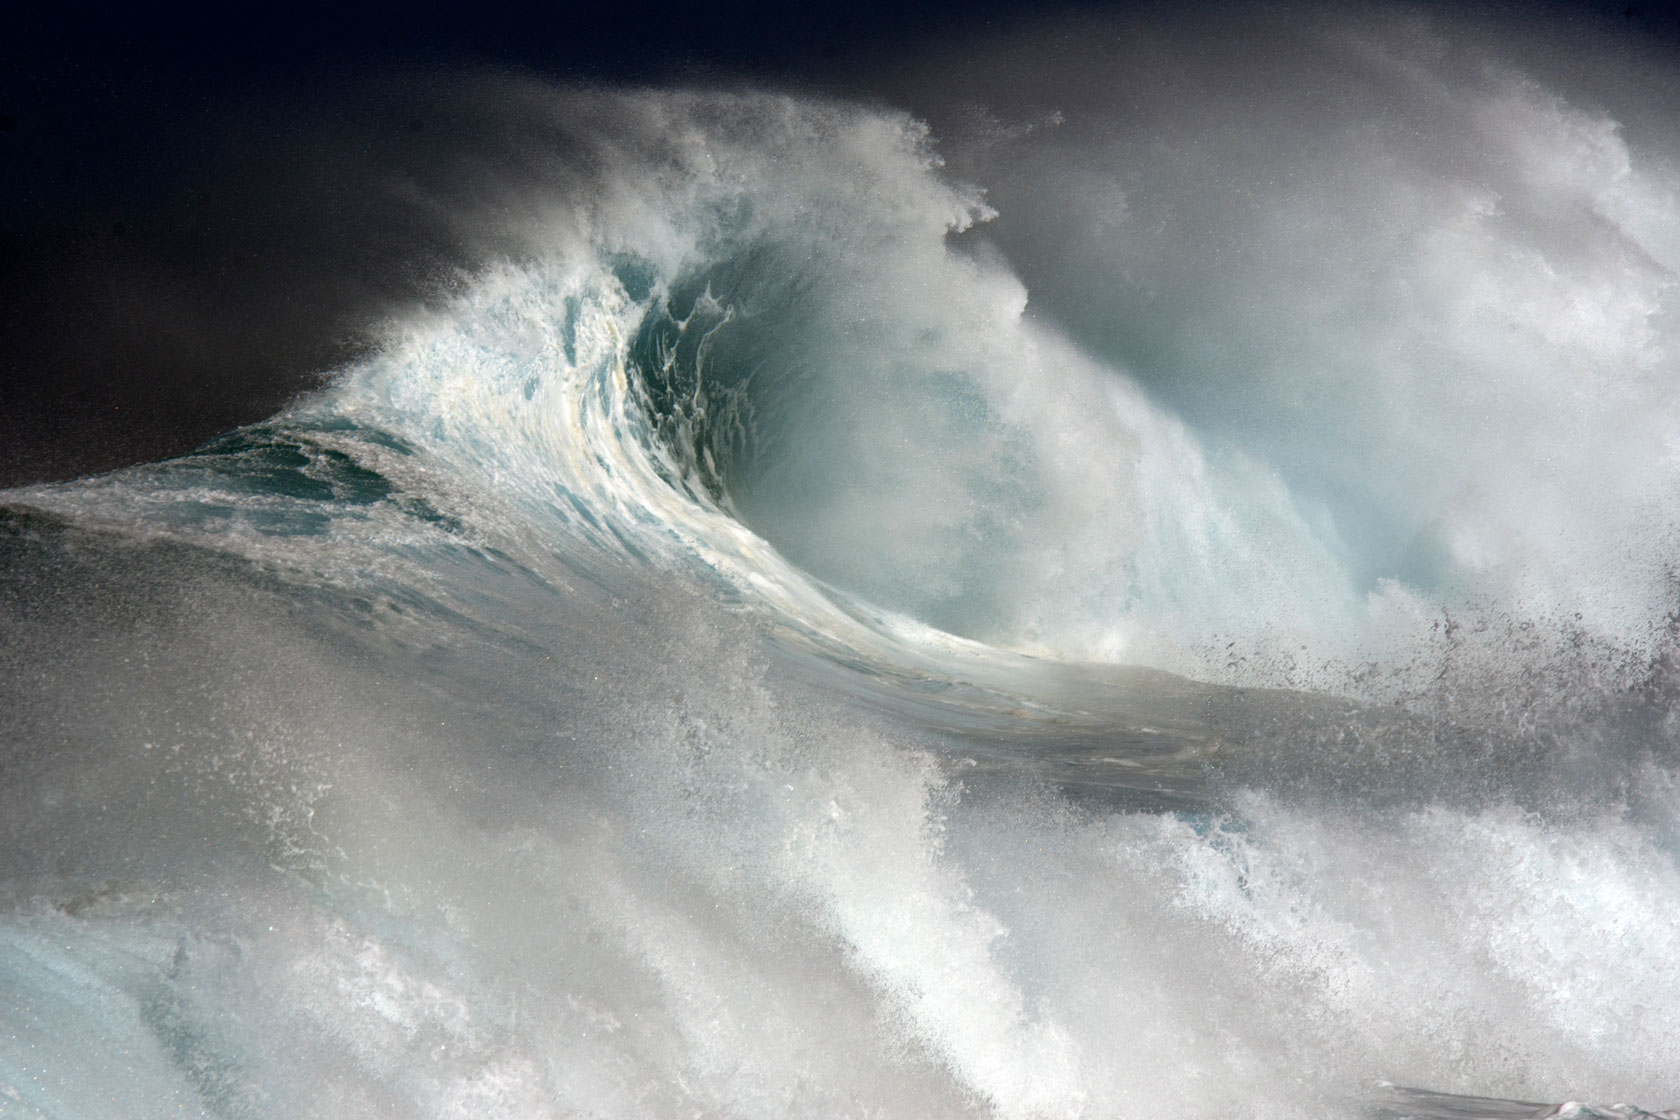 A wave crashes during a heavy swell in the Pacific.